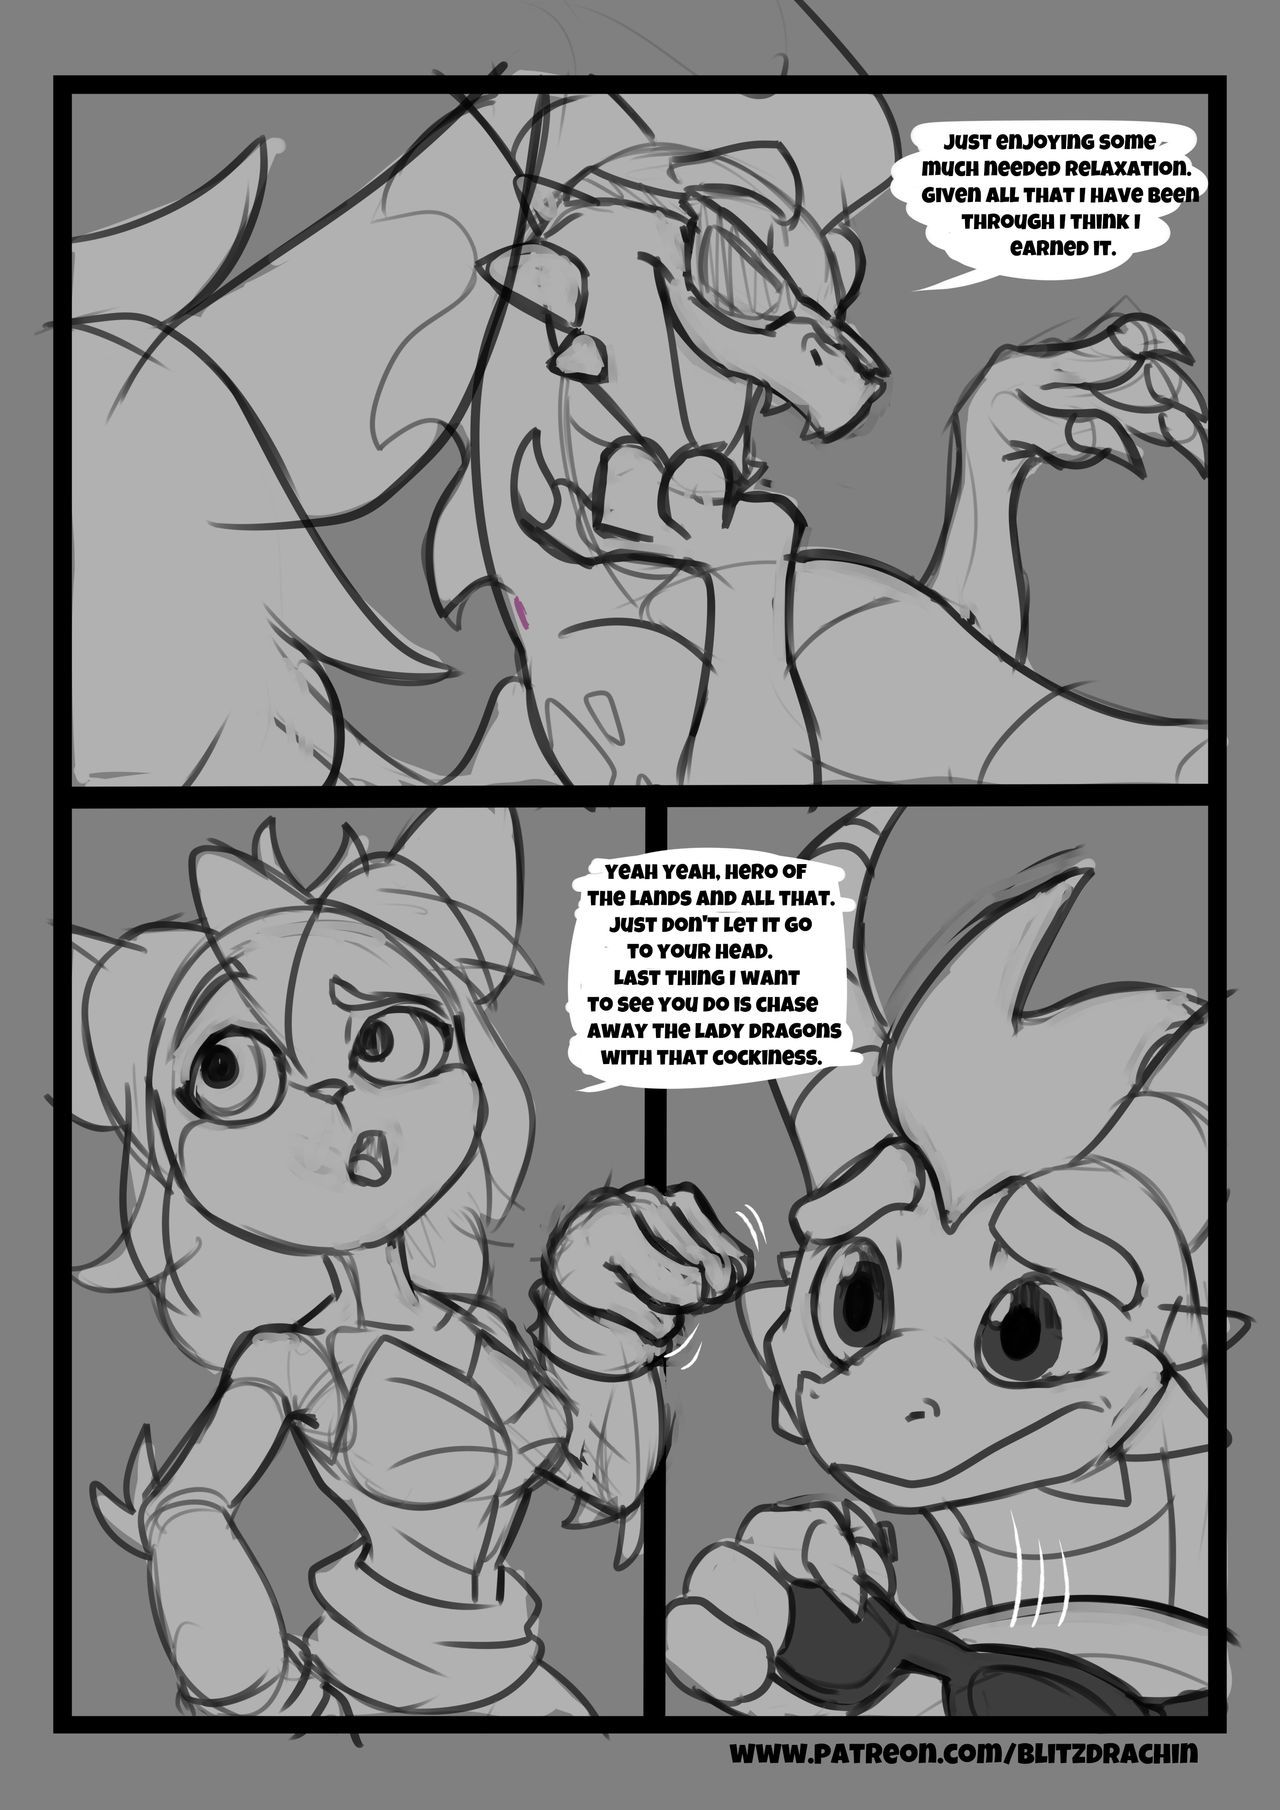 [Blitzdrachin] A Time with the Hero (Spyro the Dragon) [Ongoing] 4